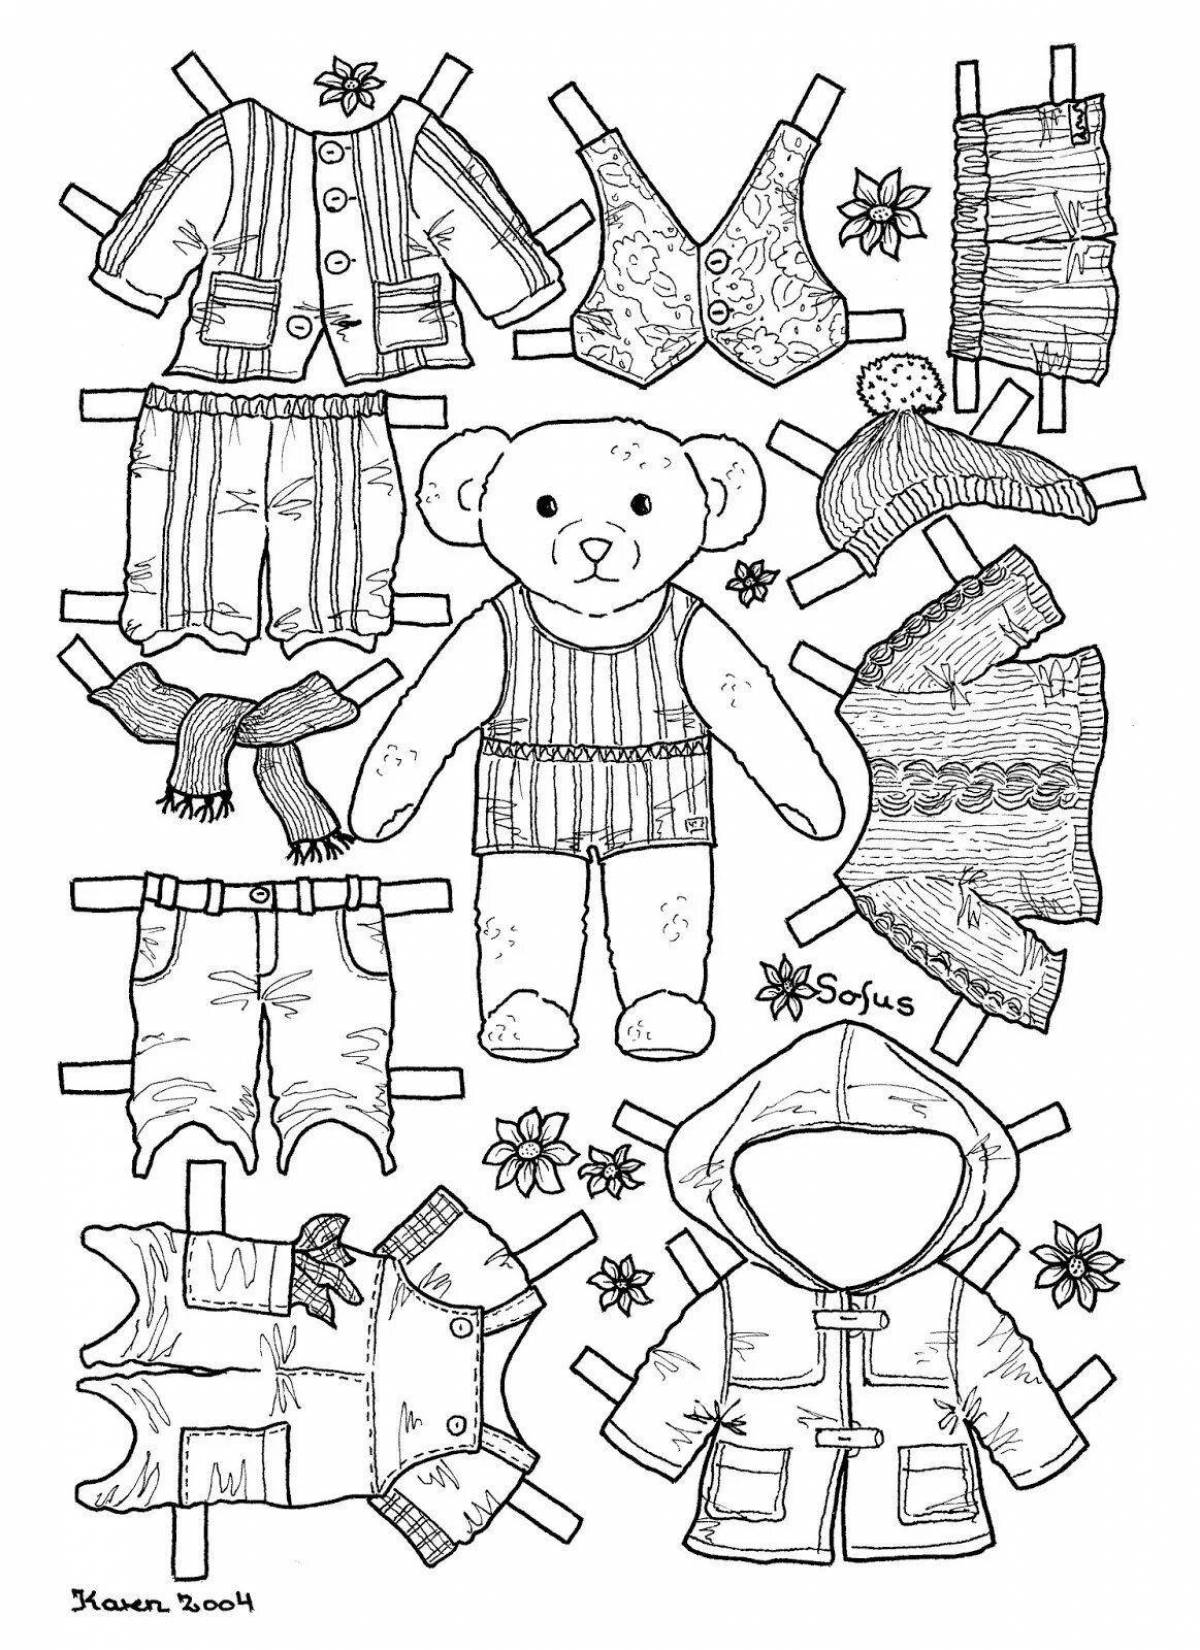 Fun animal coloring with clothes